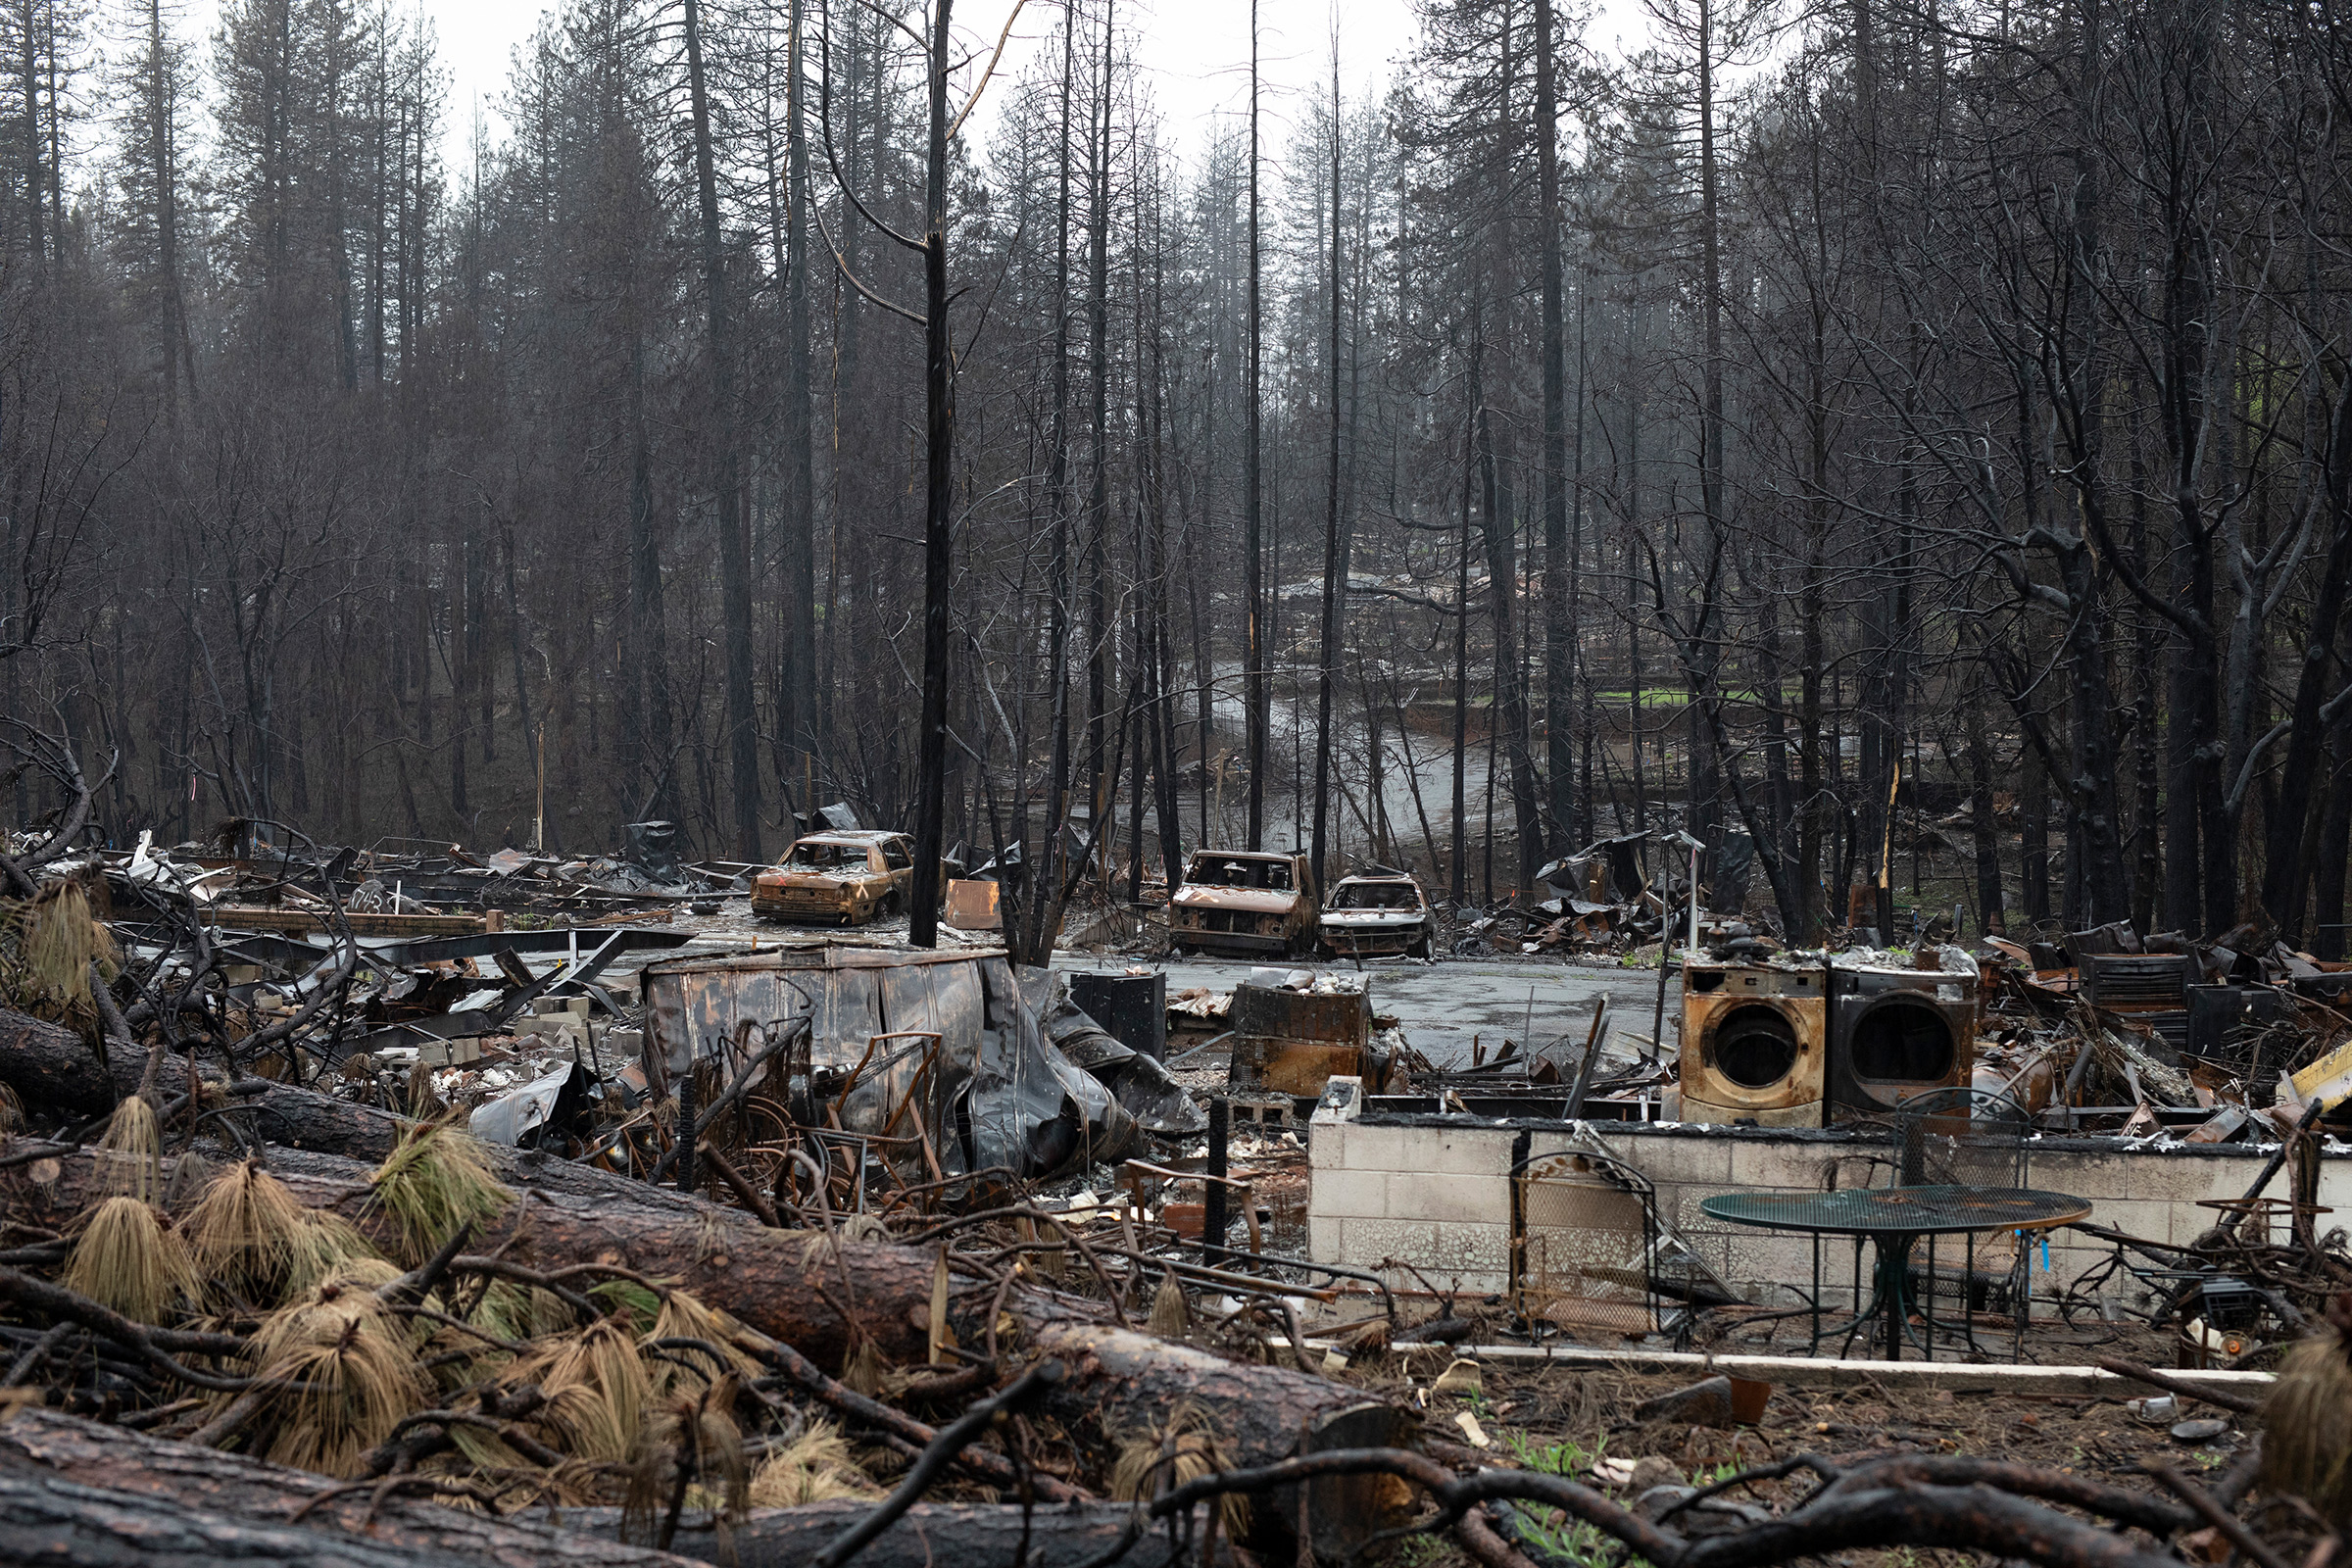 Burned down property in Paradise, strewn with debris (Lincoln Else—National Geographic)